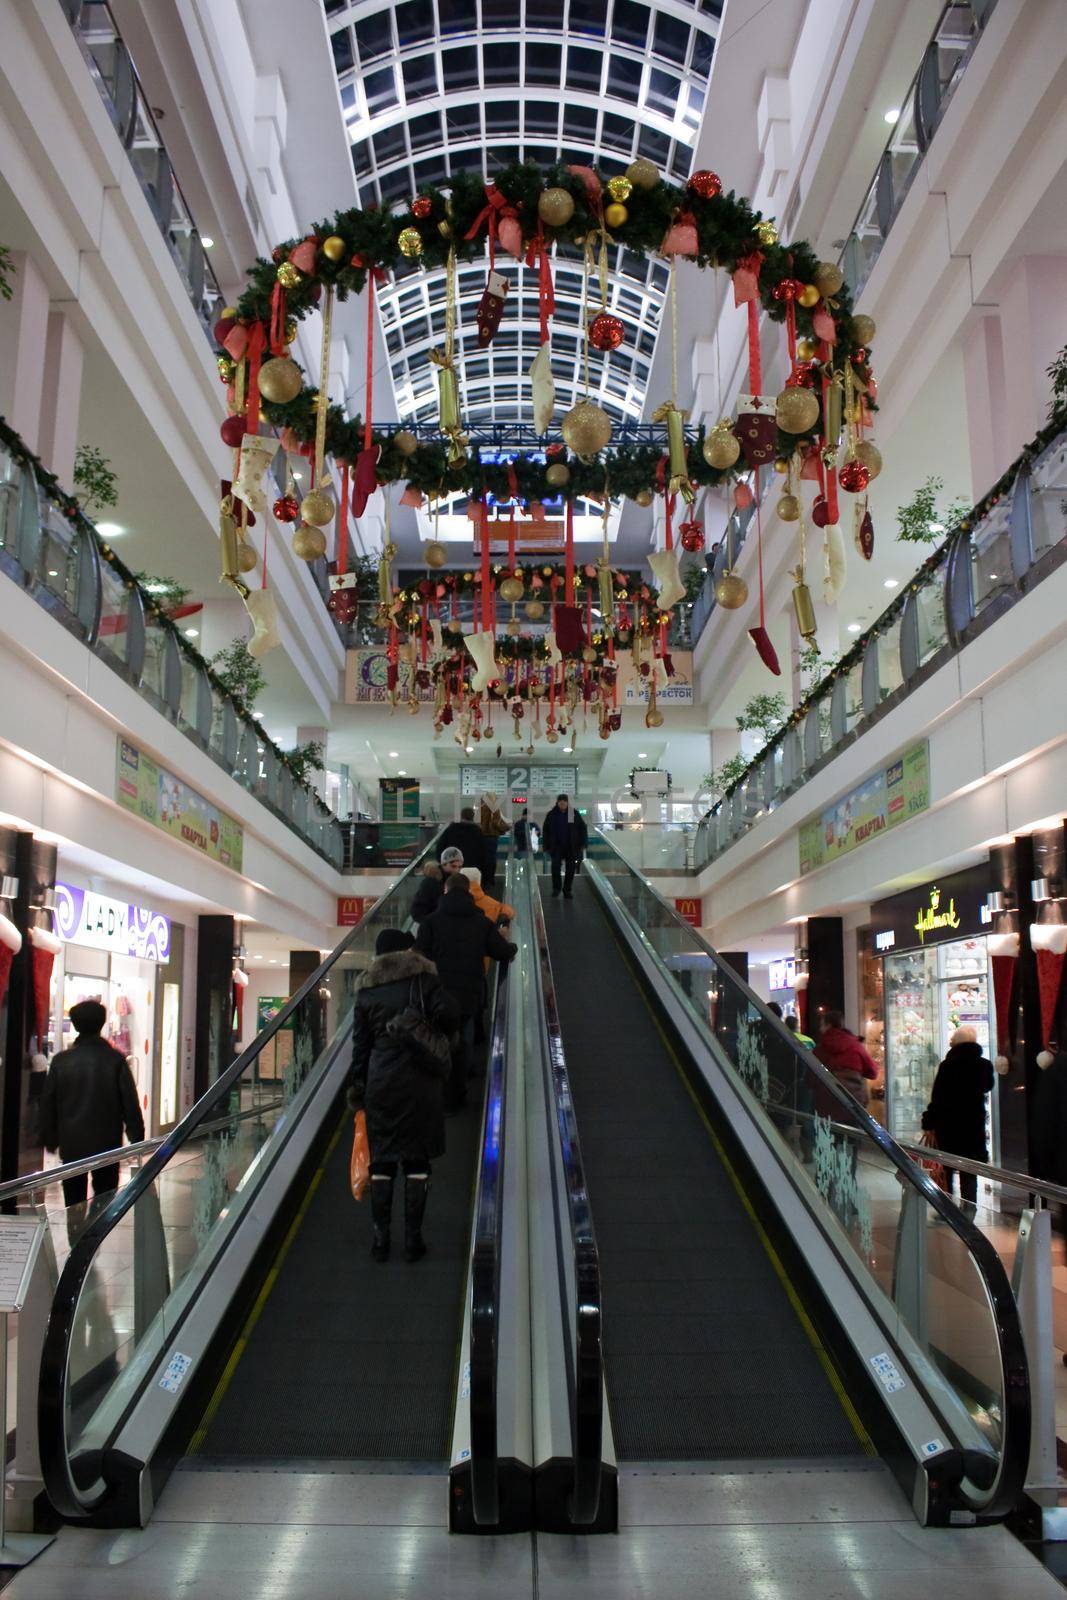 modern trade center interior with new year decorations